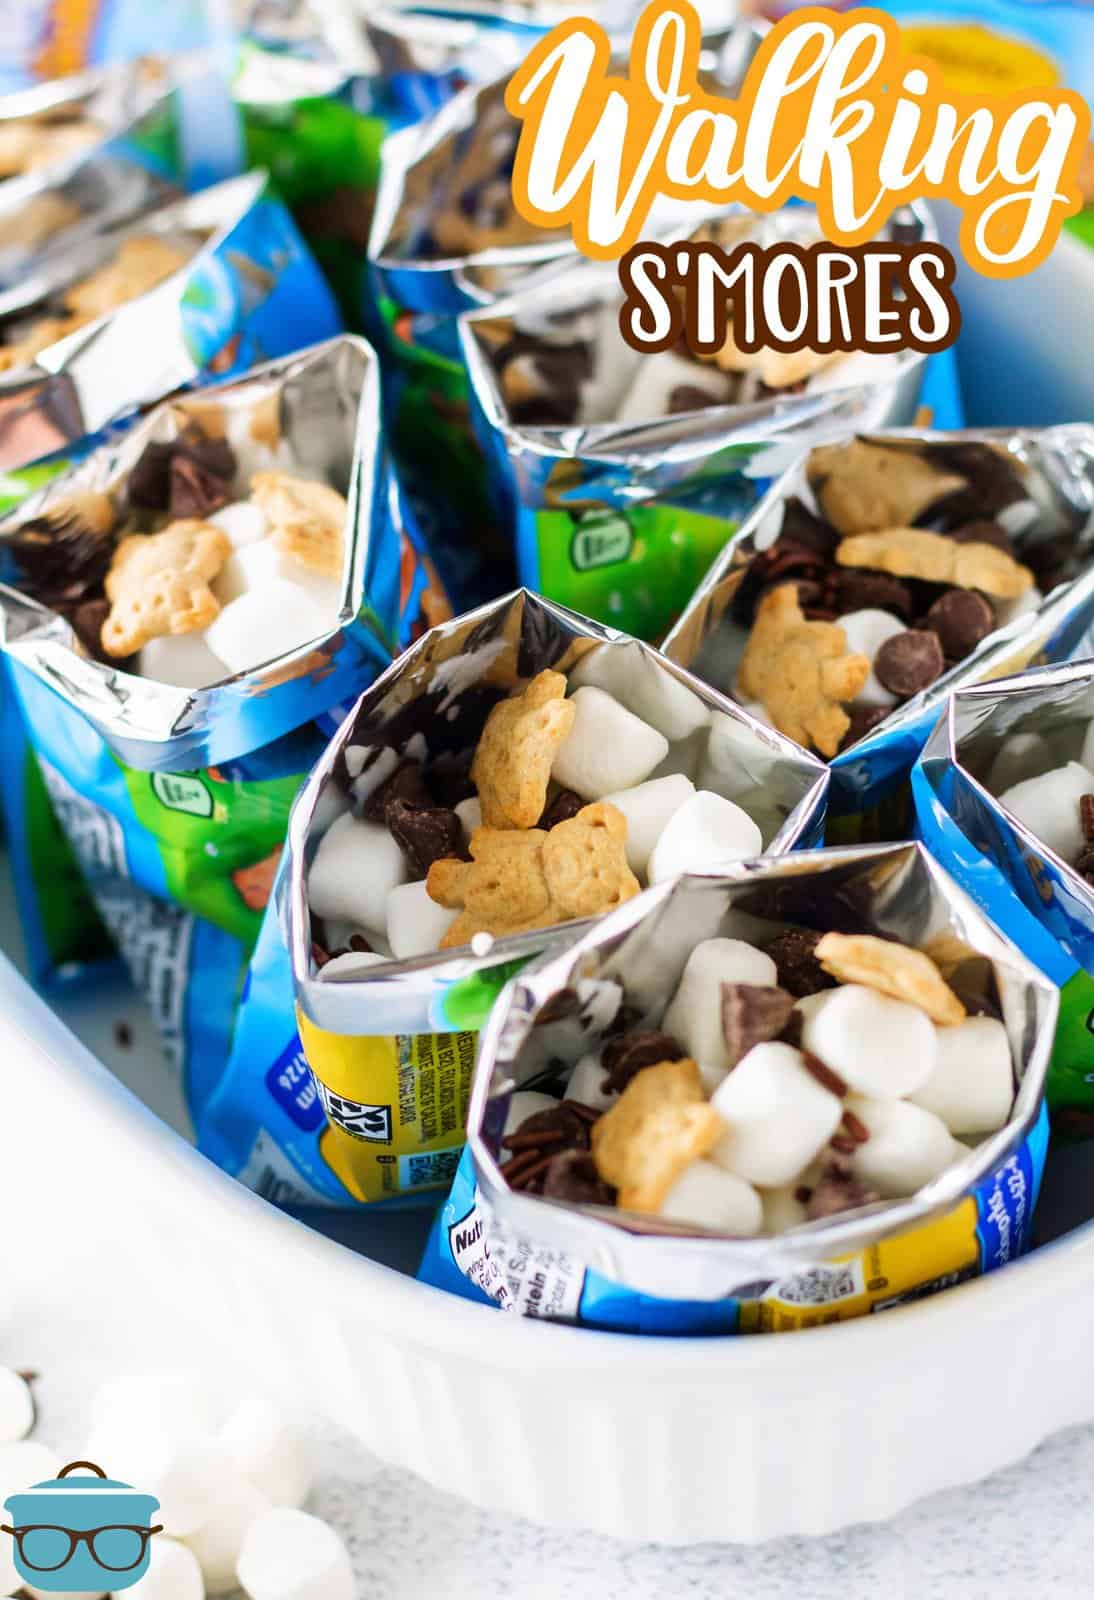 Pinterest image of inside of bags filled with ingredients for the Walking S'mores.